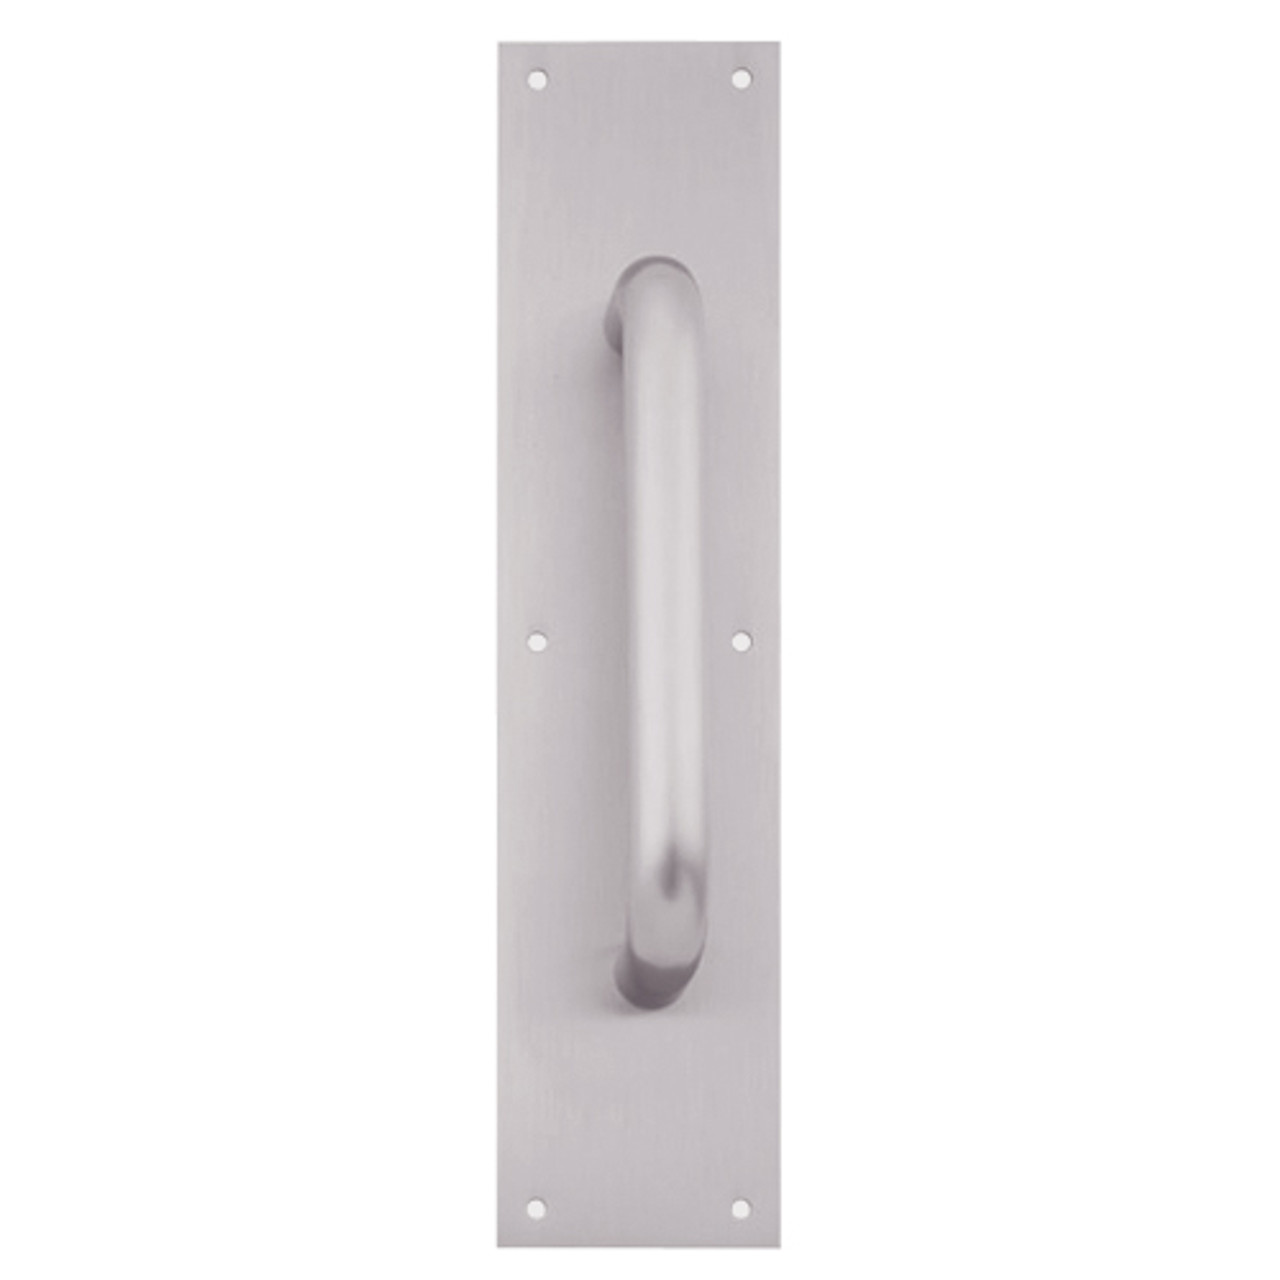 8303-10-US32D-4x16 IVES Architectural Door Trim 4x16 Inch Pull Plate in Satin Stainless Steel